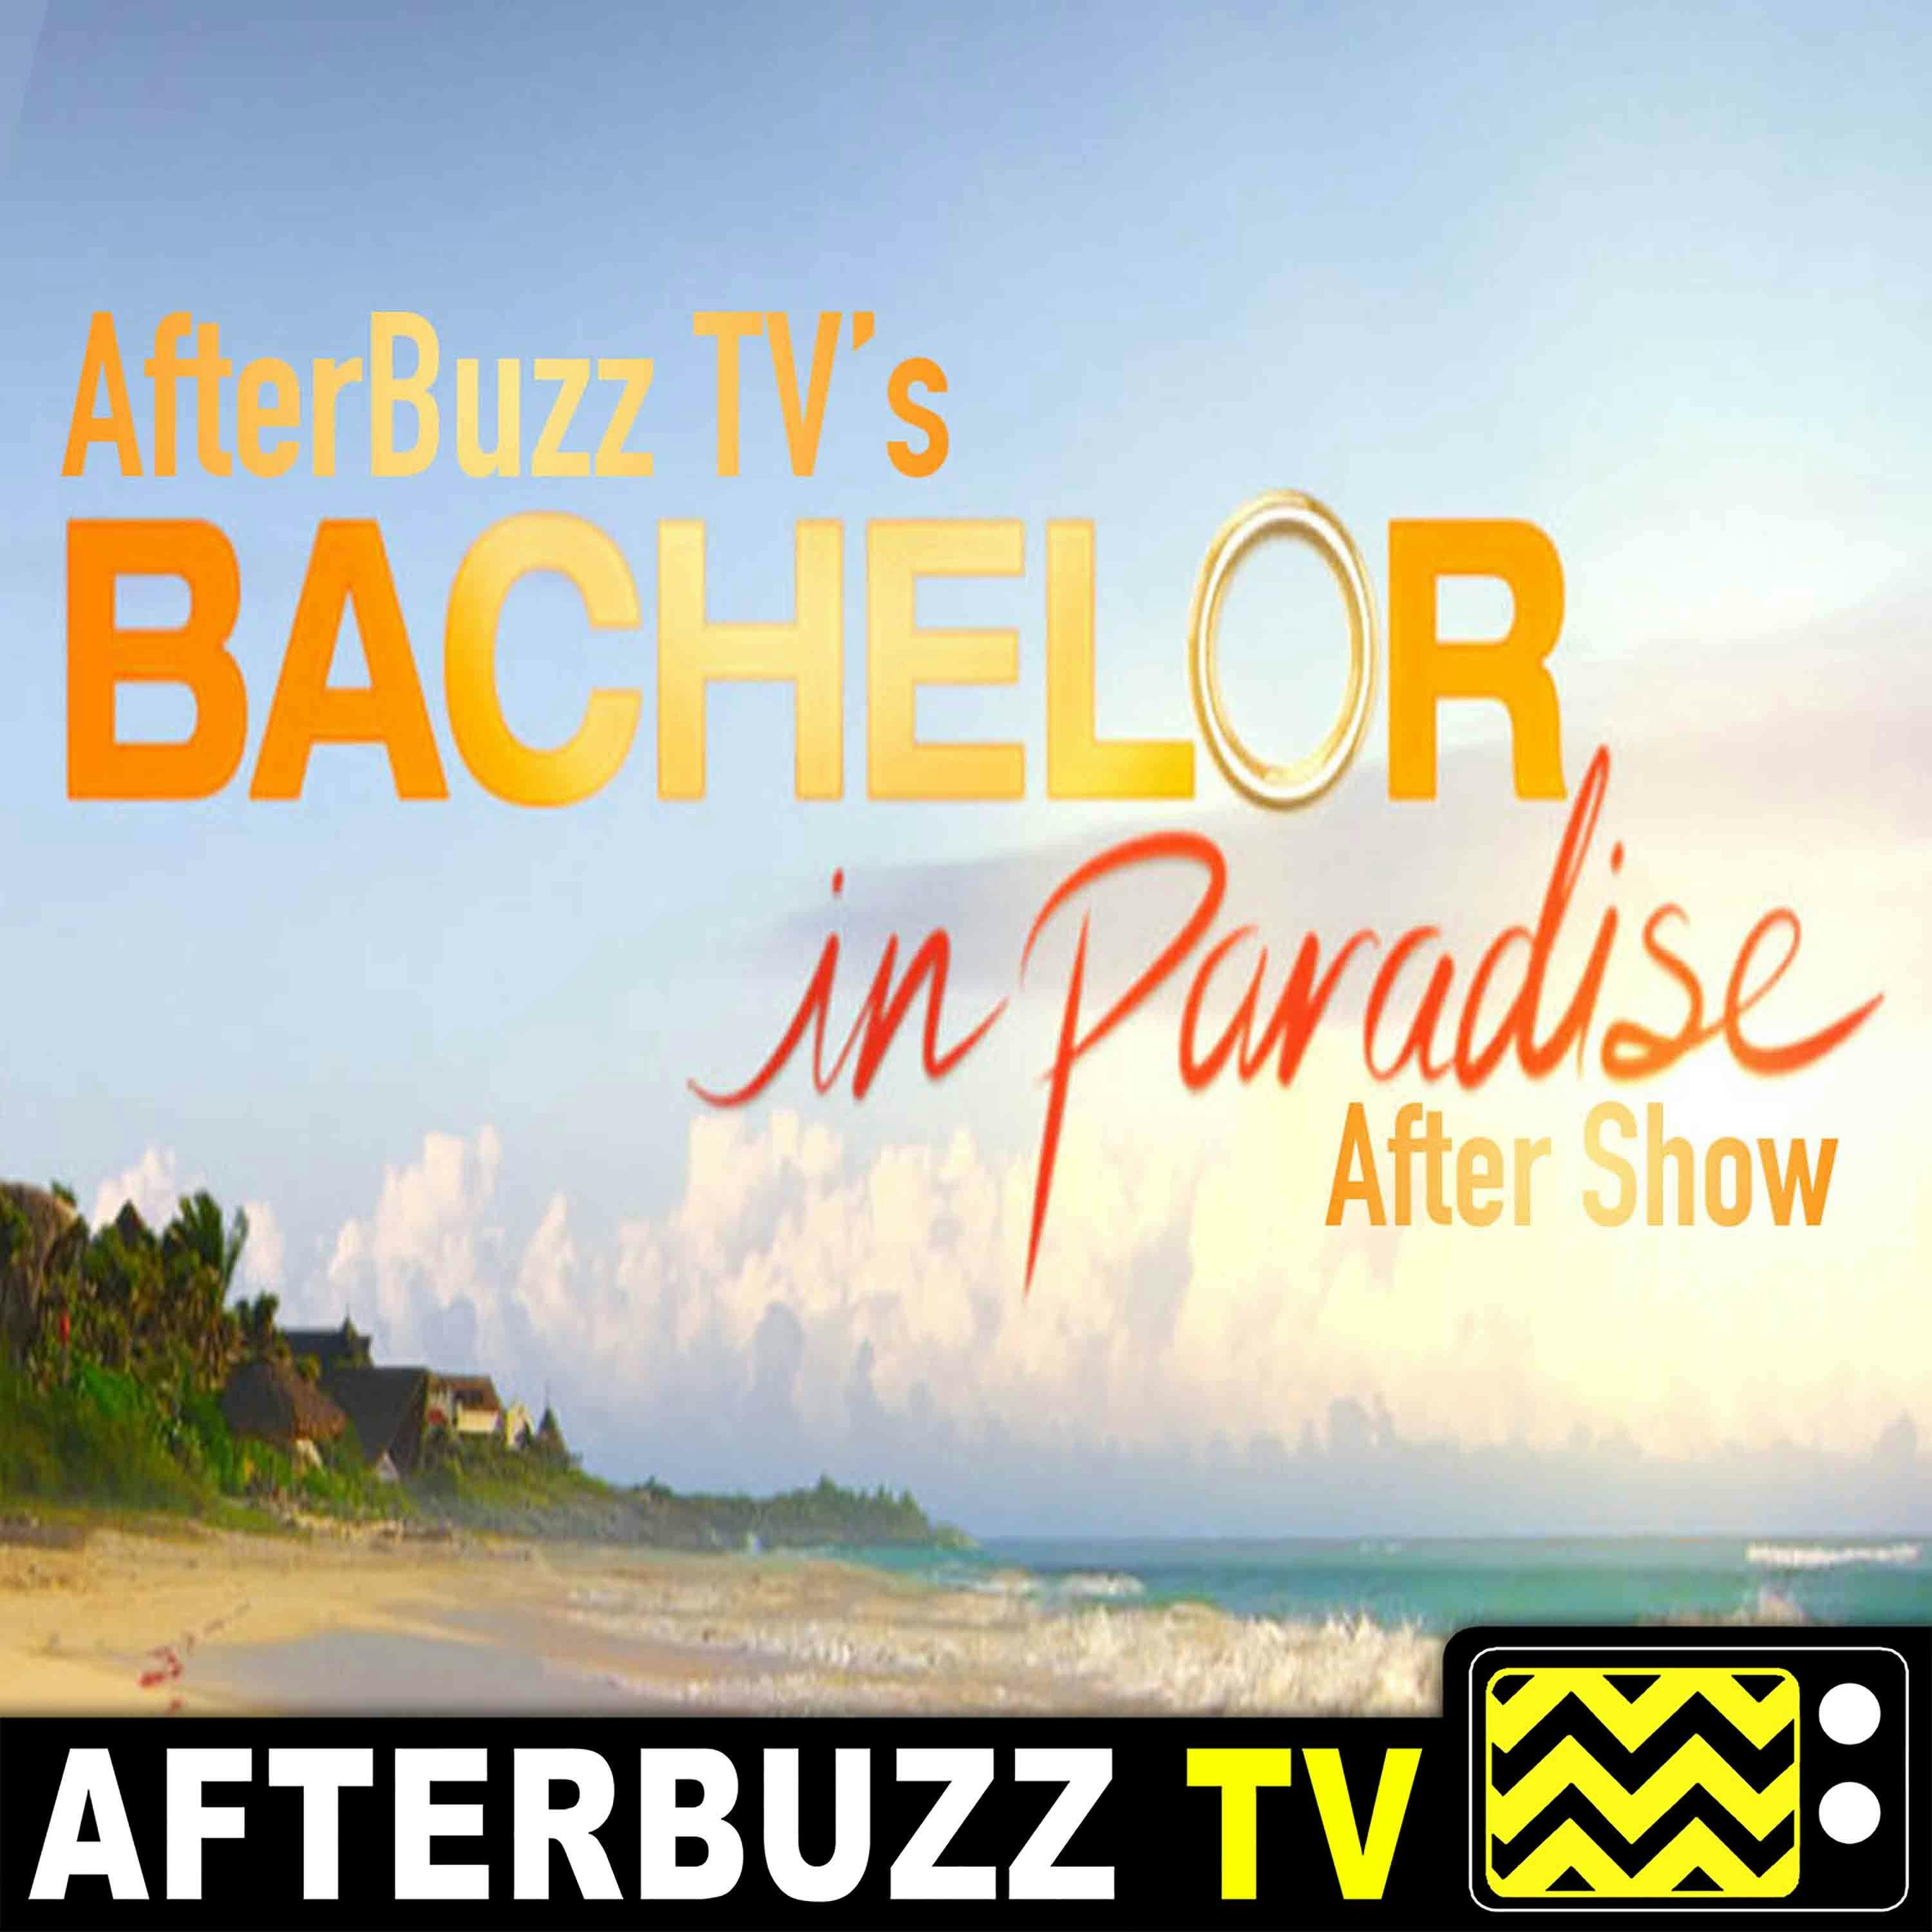 Bachelor In Paradise S:4 | Jasmine Goode & Fred Johnson Guest on Episodes 6 – 8 | AfterBuzz TV AfterShow